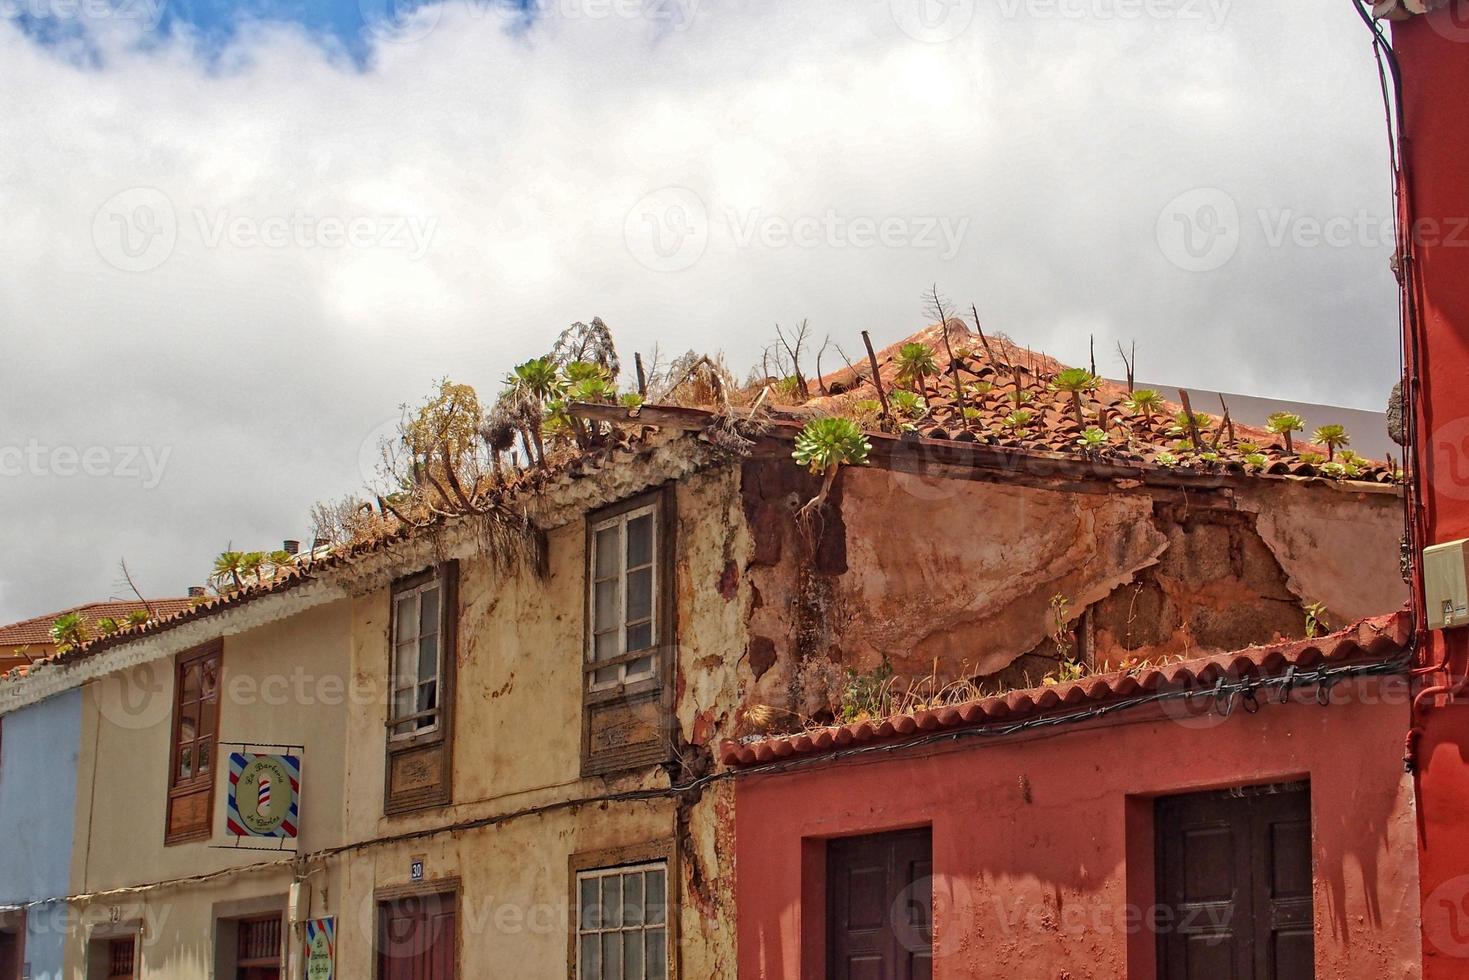 streets with historic buildings on the Spanish Canary Island Tenerife in the former capital photo